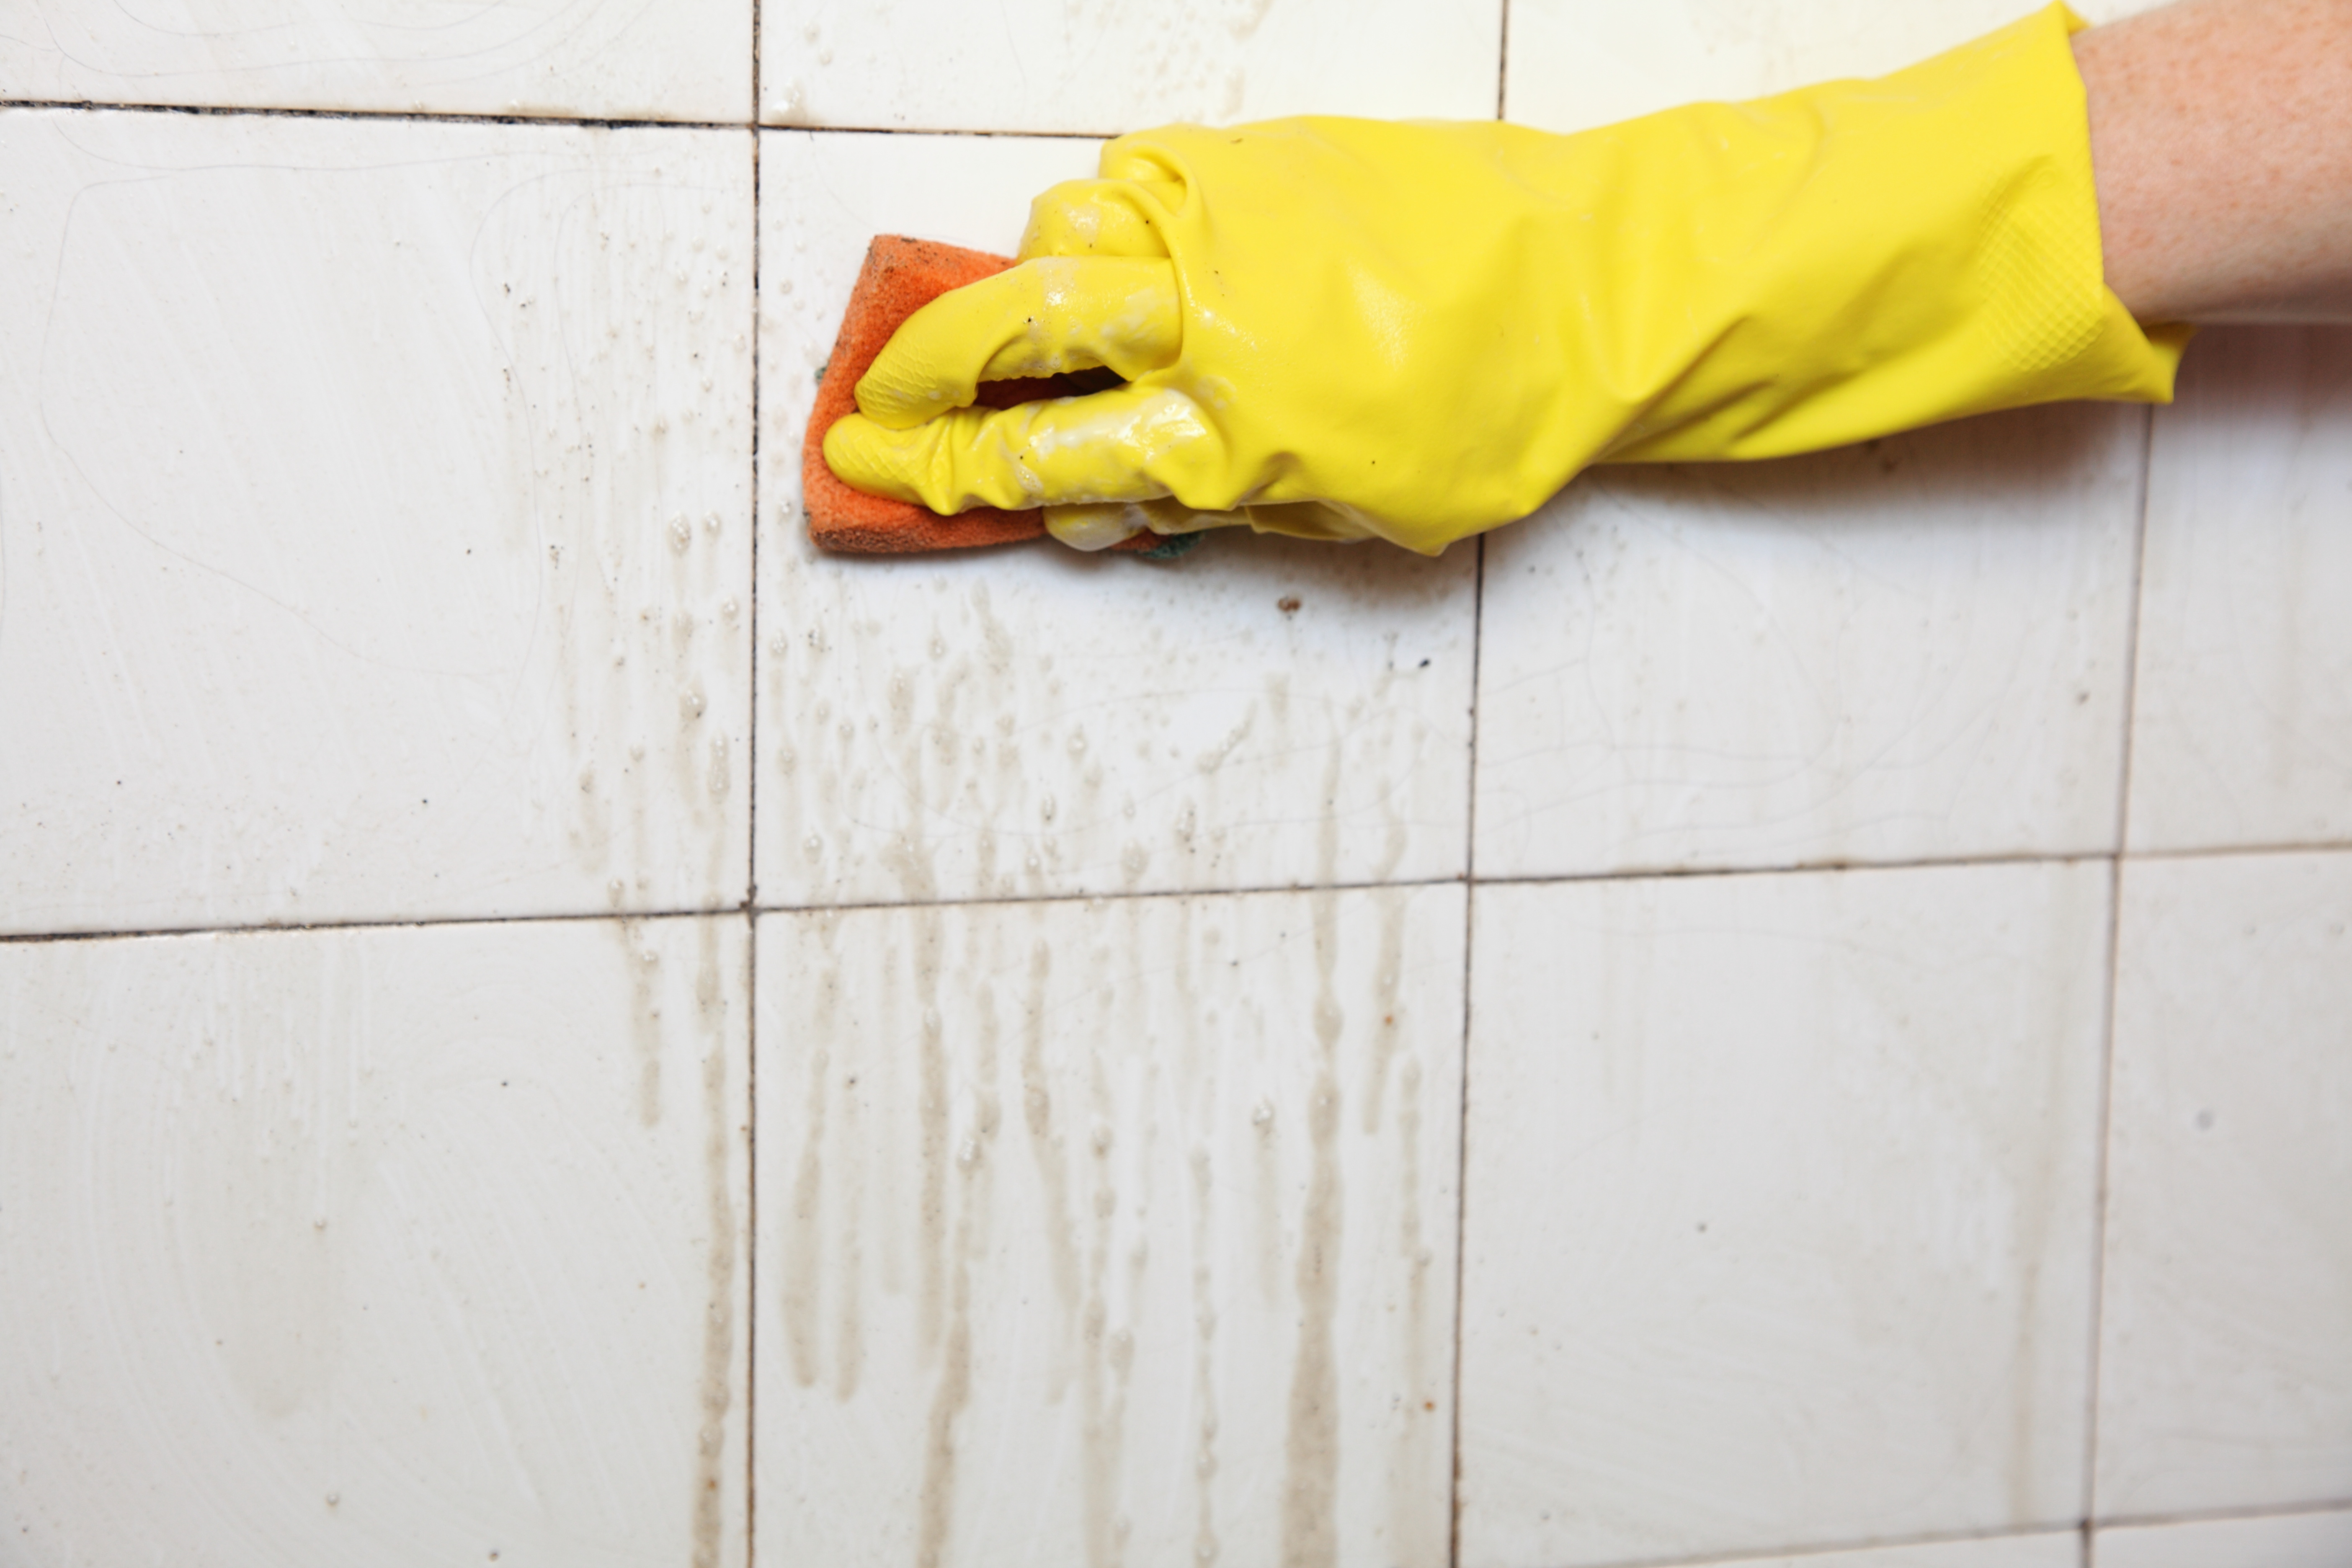 tile grout cleaner, Grime and dirt on bathroom tile